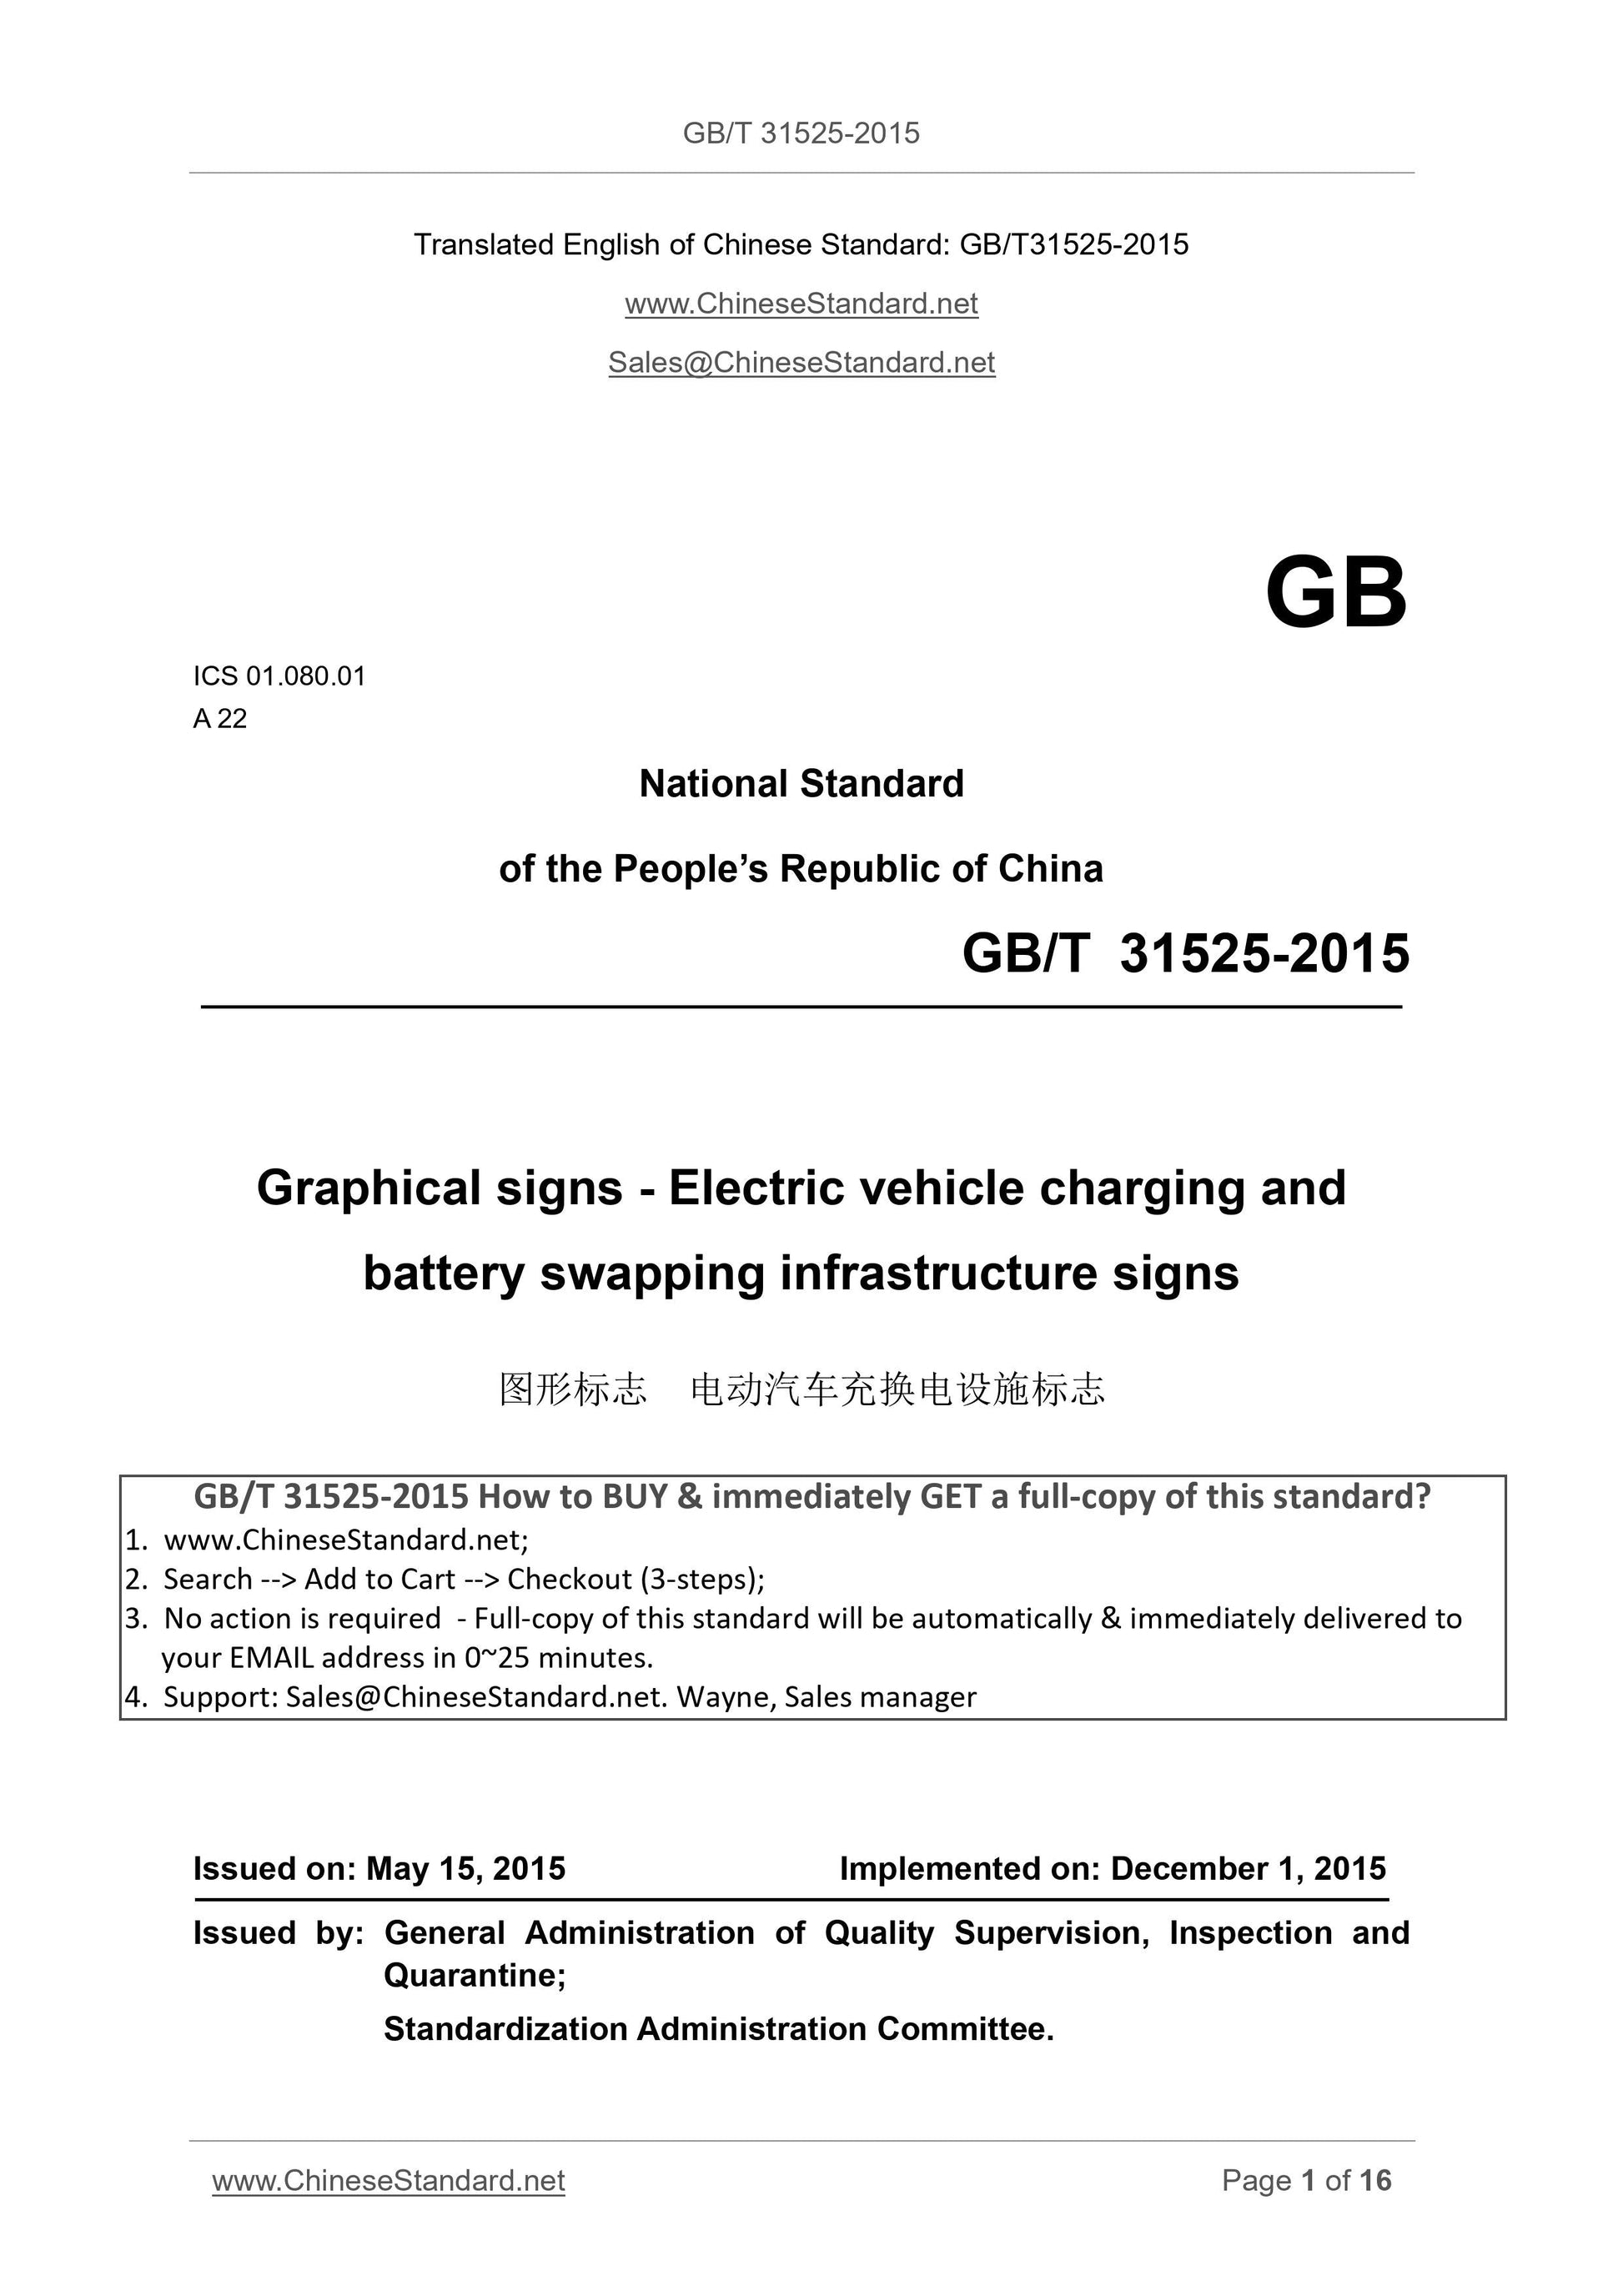 GB/T 31525-2015 Page 1